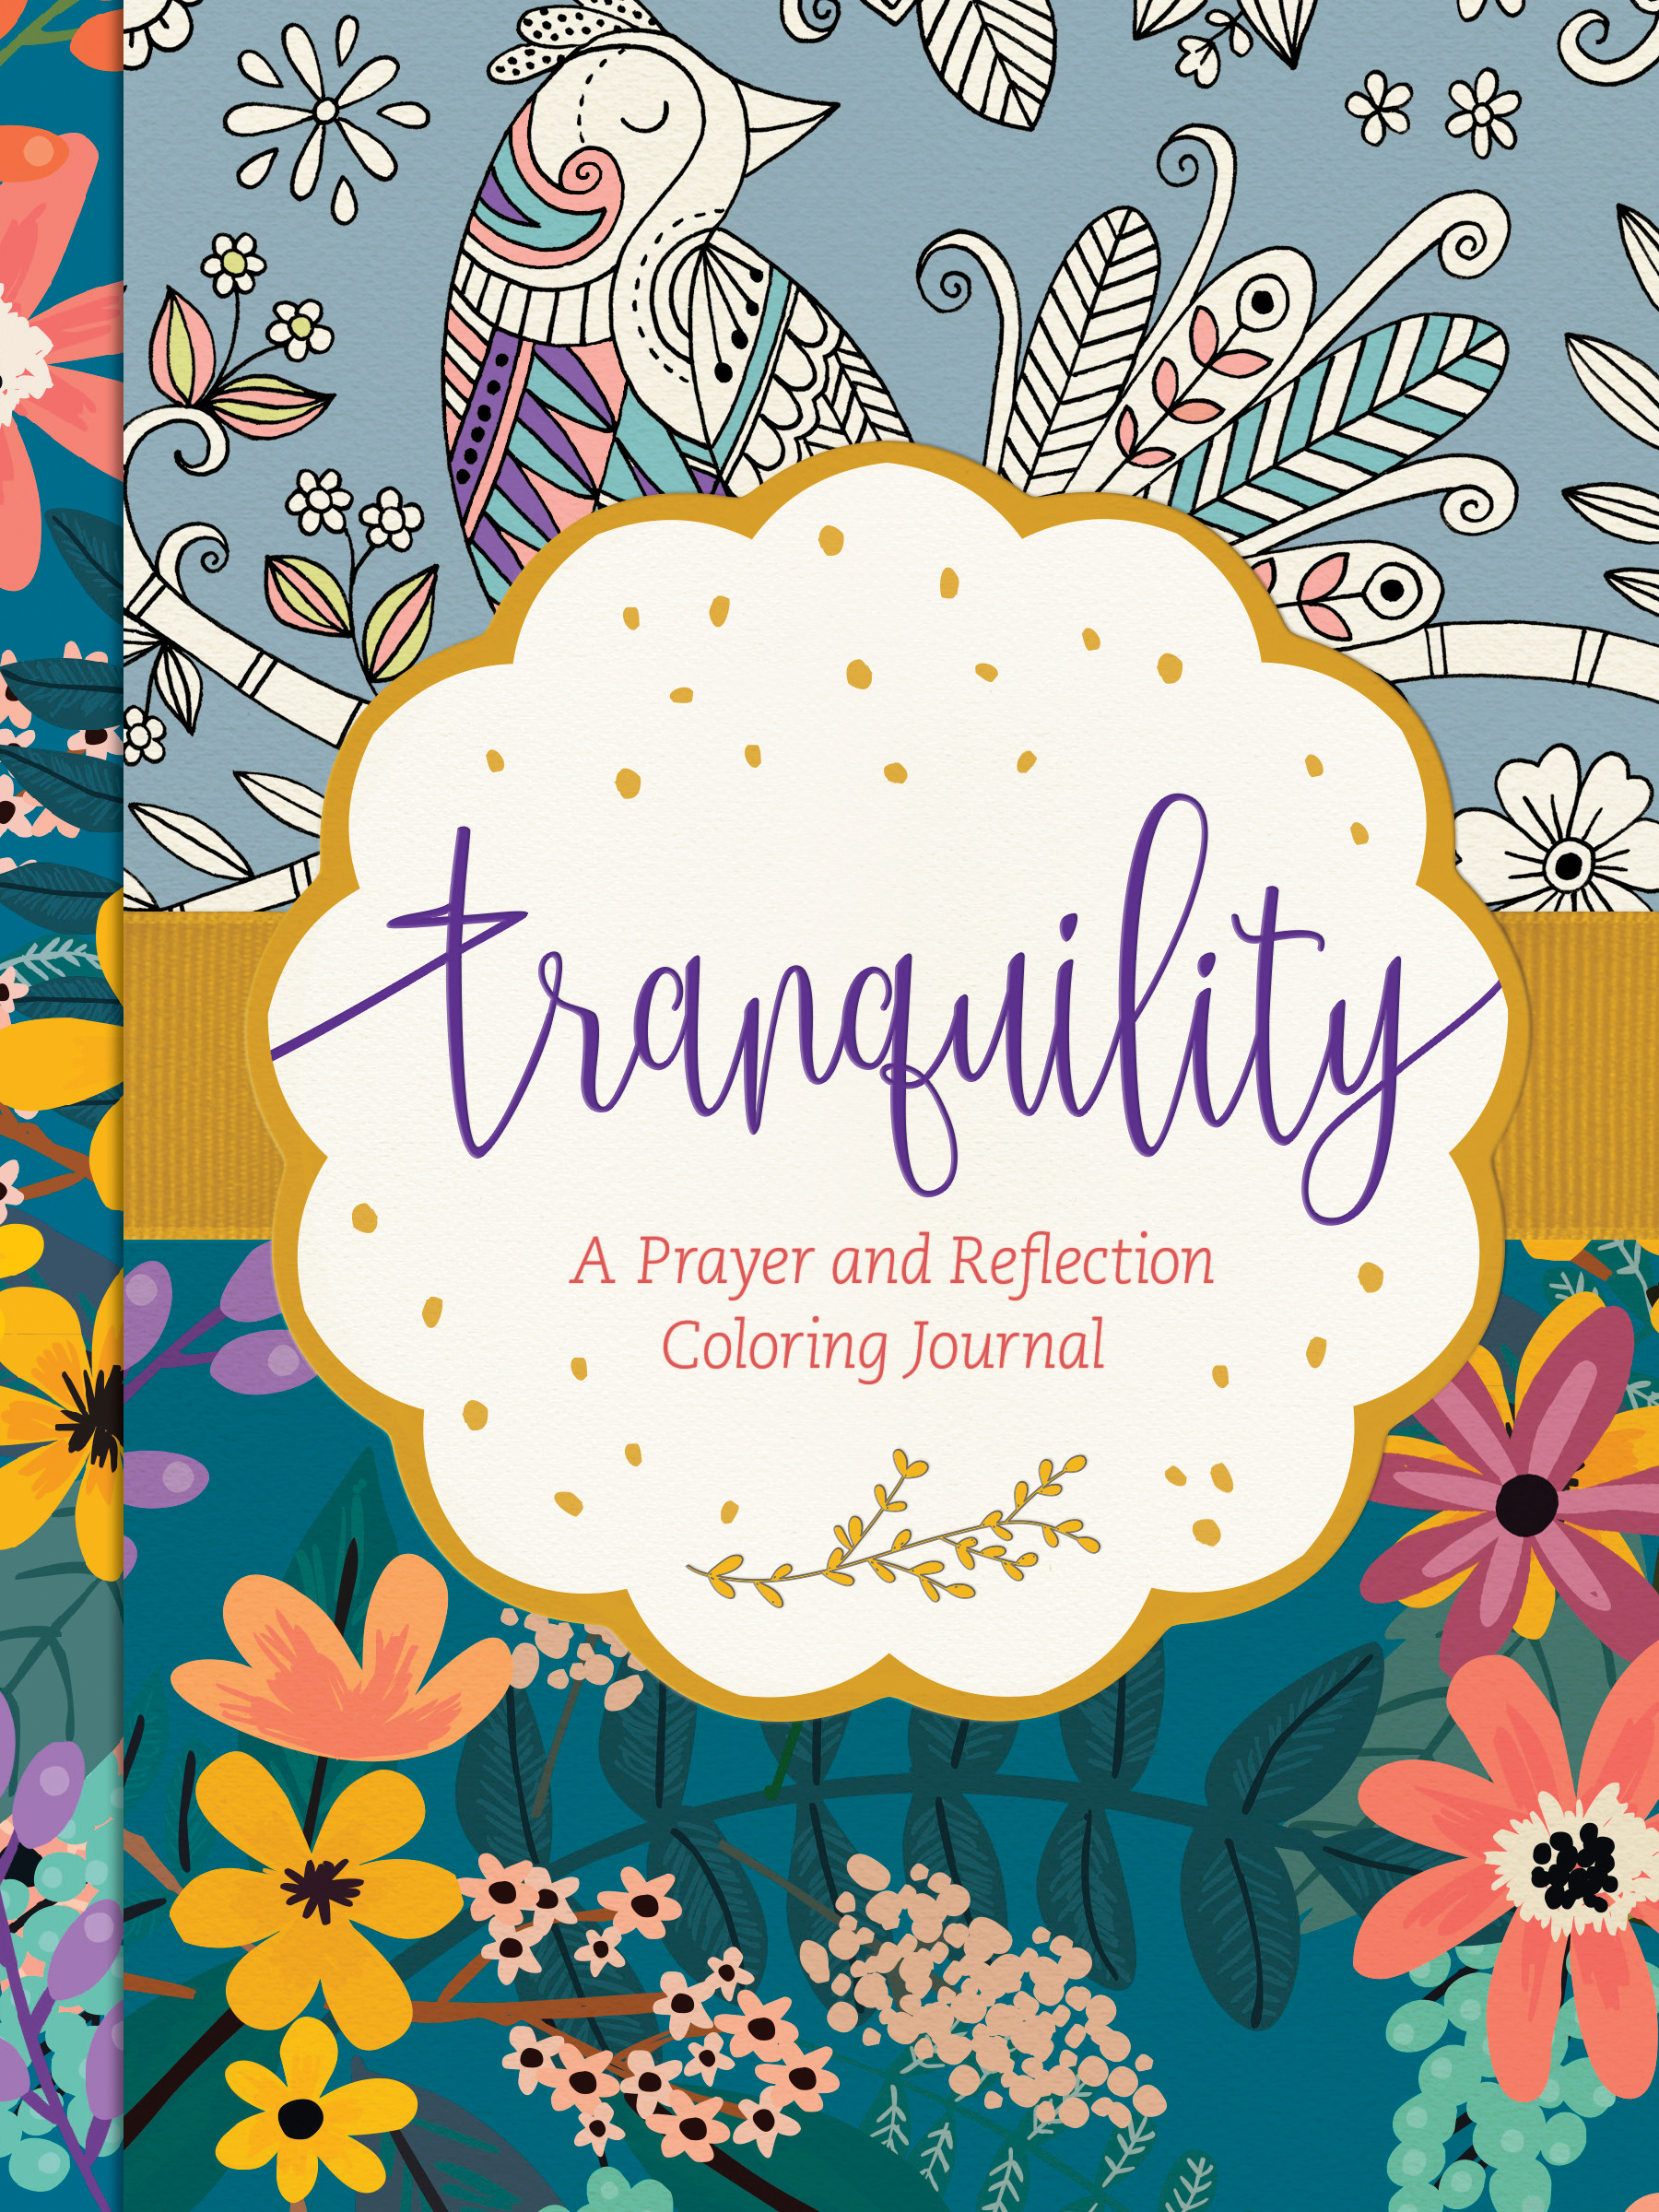 Tranquility: Prayer and Reflection Coloring Journal - Book Review 